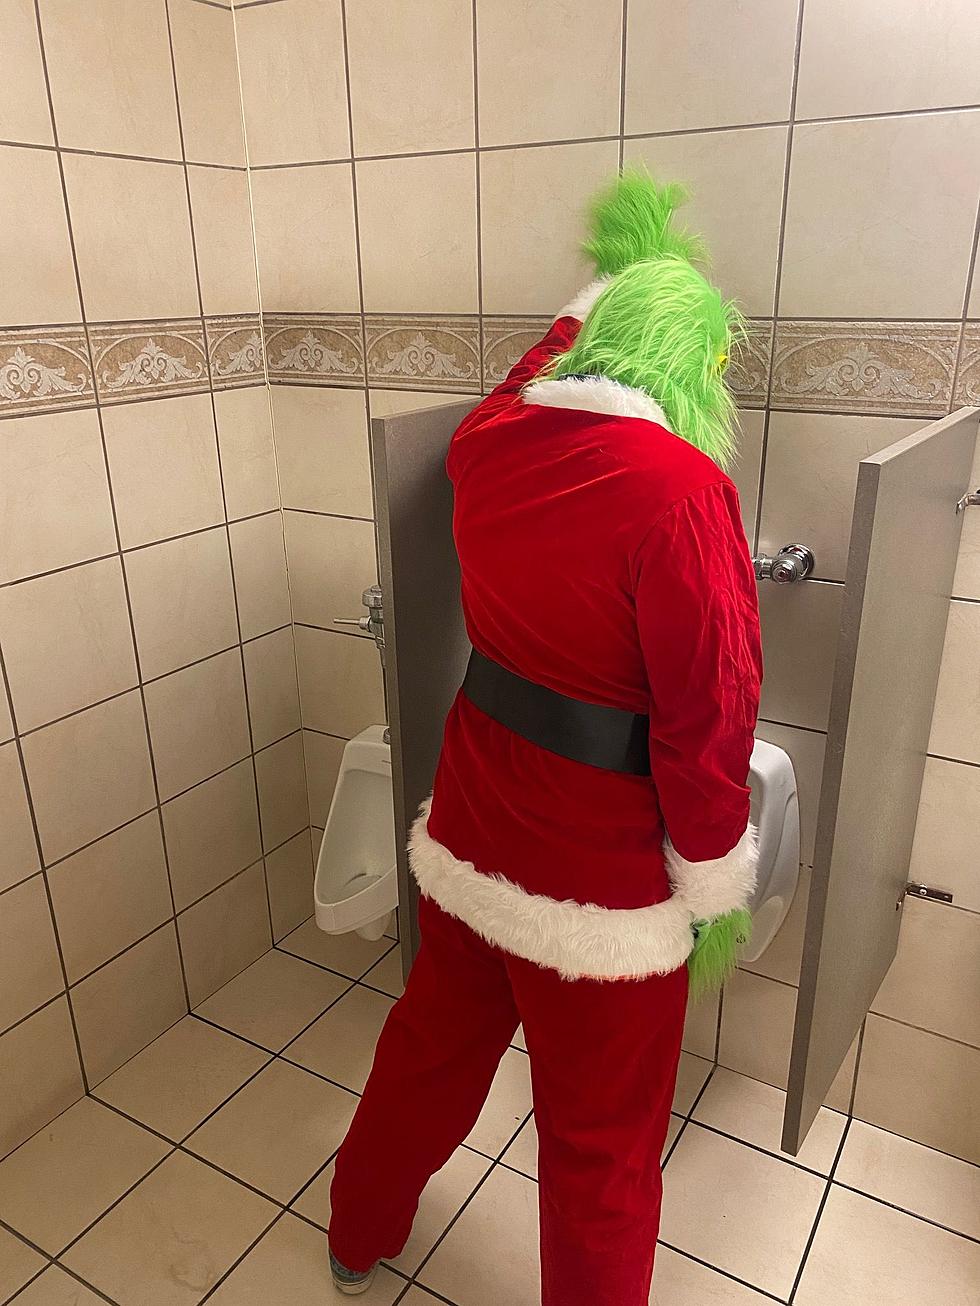 The Grinch Should Immediately Be Arrested And Thrown Into Monmouth County, NJ Jail